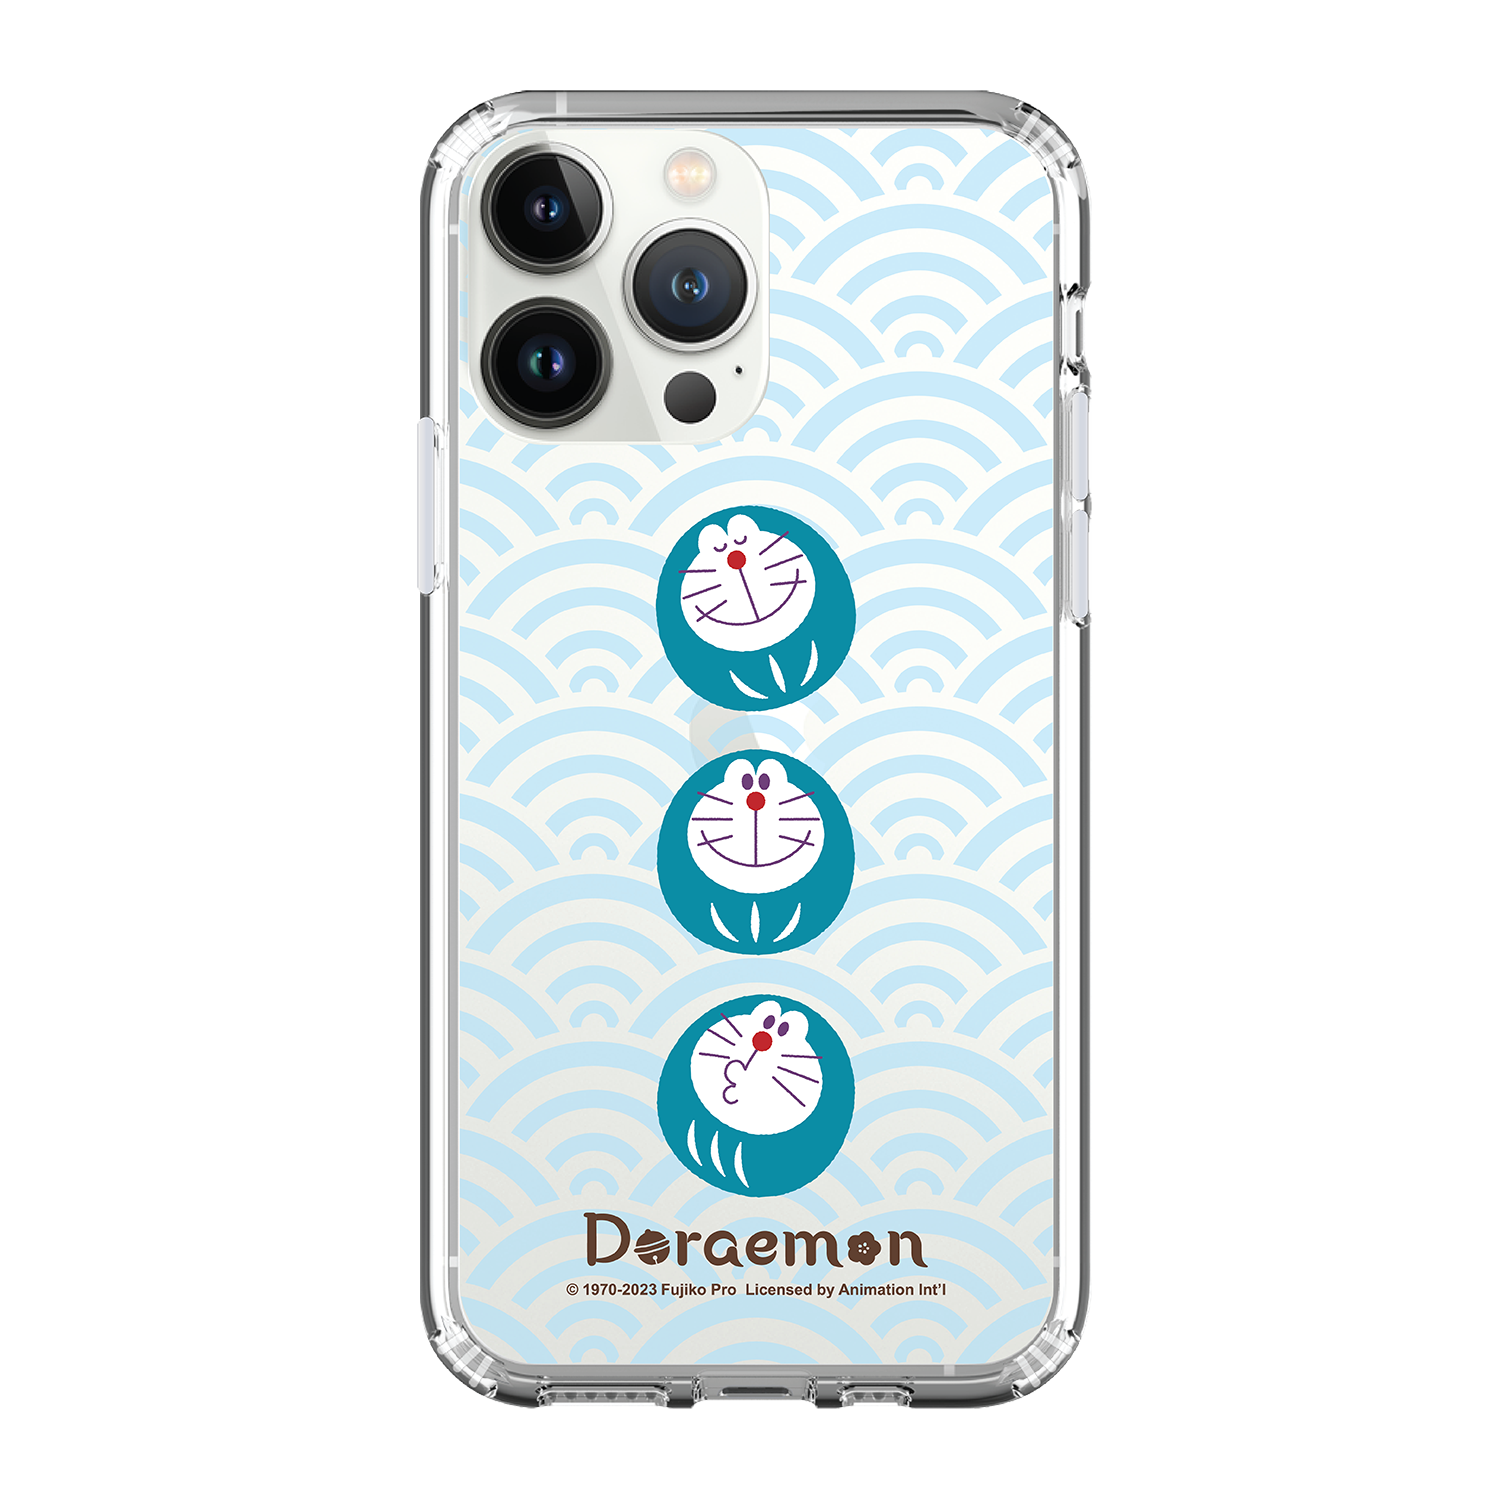 Doraemon Clear Case / iPhone Case / Android Case / Samsung Case 多啦A夢 正版授權 全包邊氣囊防撞手機殼 (DO122)